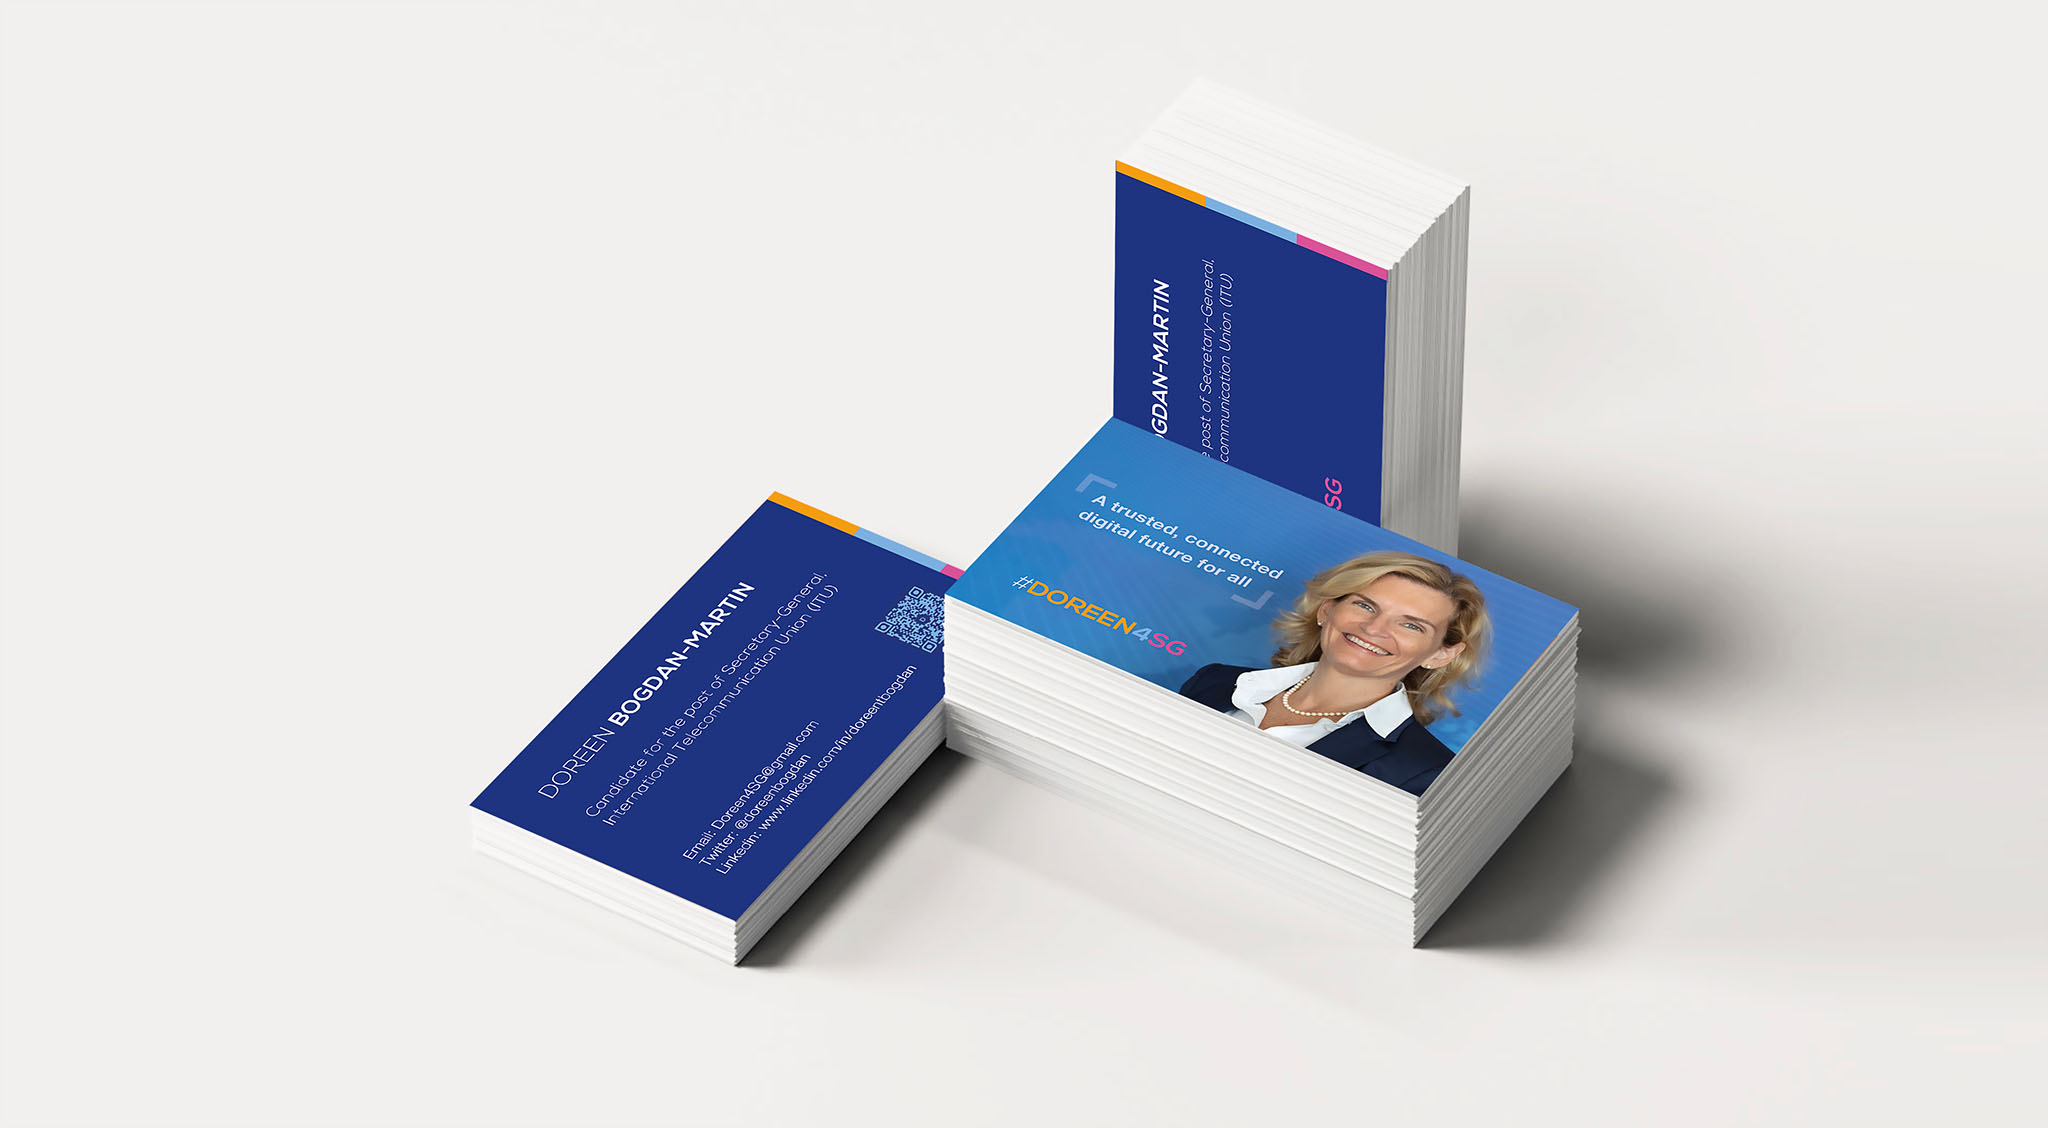 Image showing business cards with a woman on the front face - digital and print marketing samples created by SmartCuts Creative in Lausanne and Geneva, Switzerland.